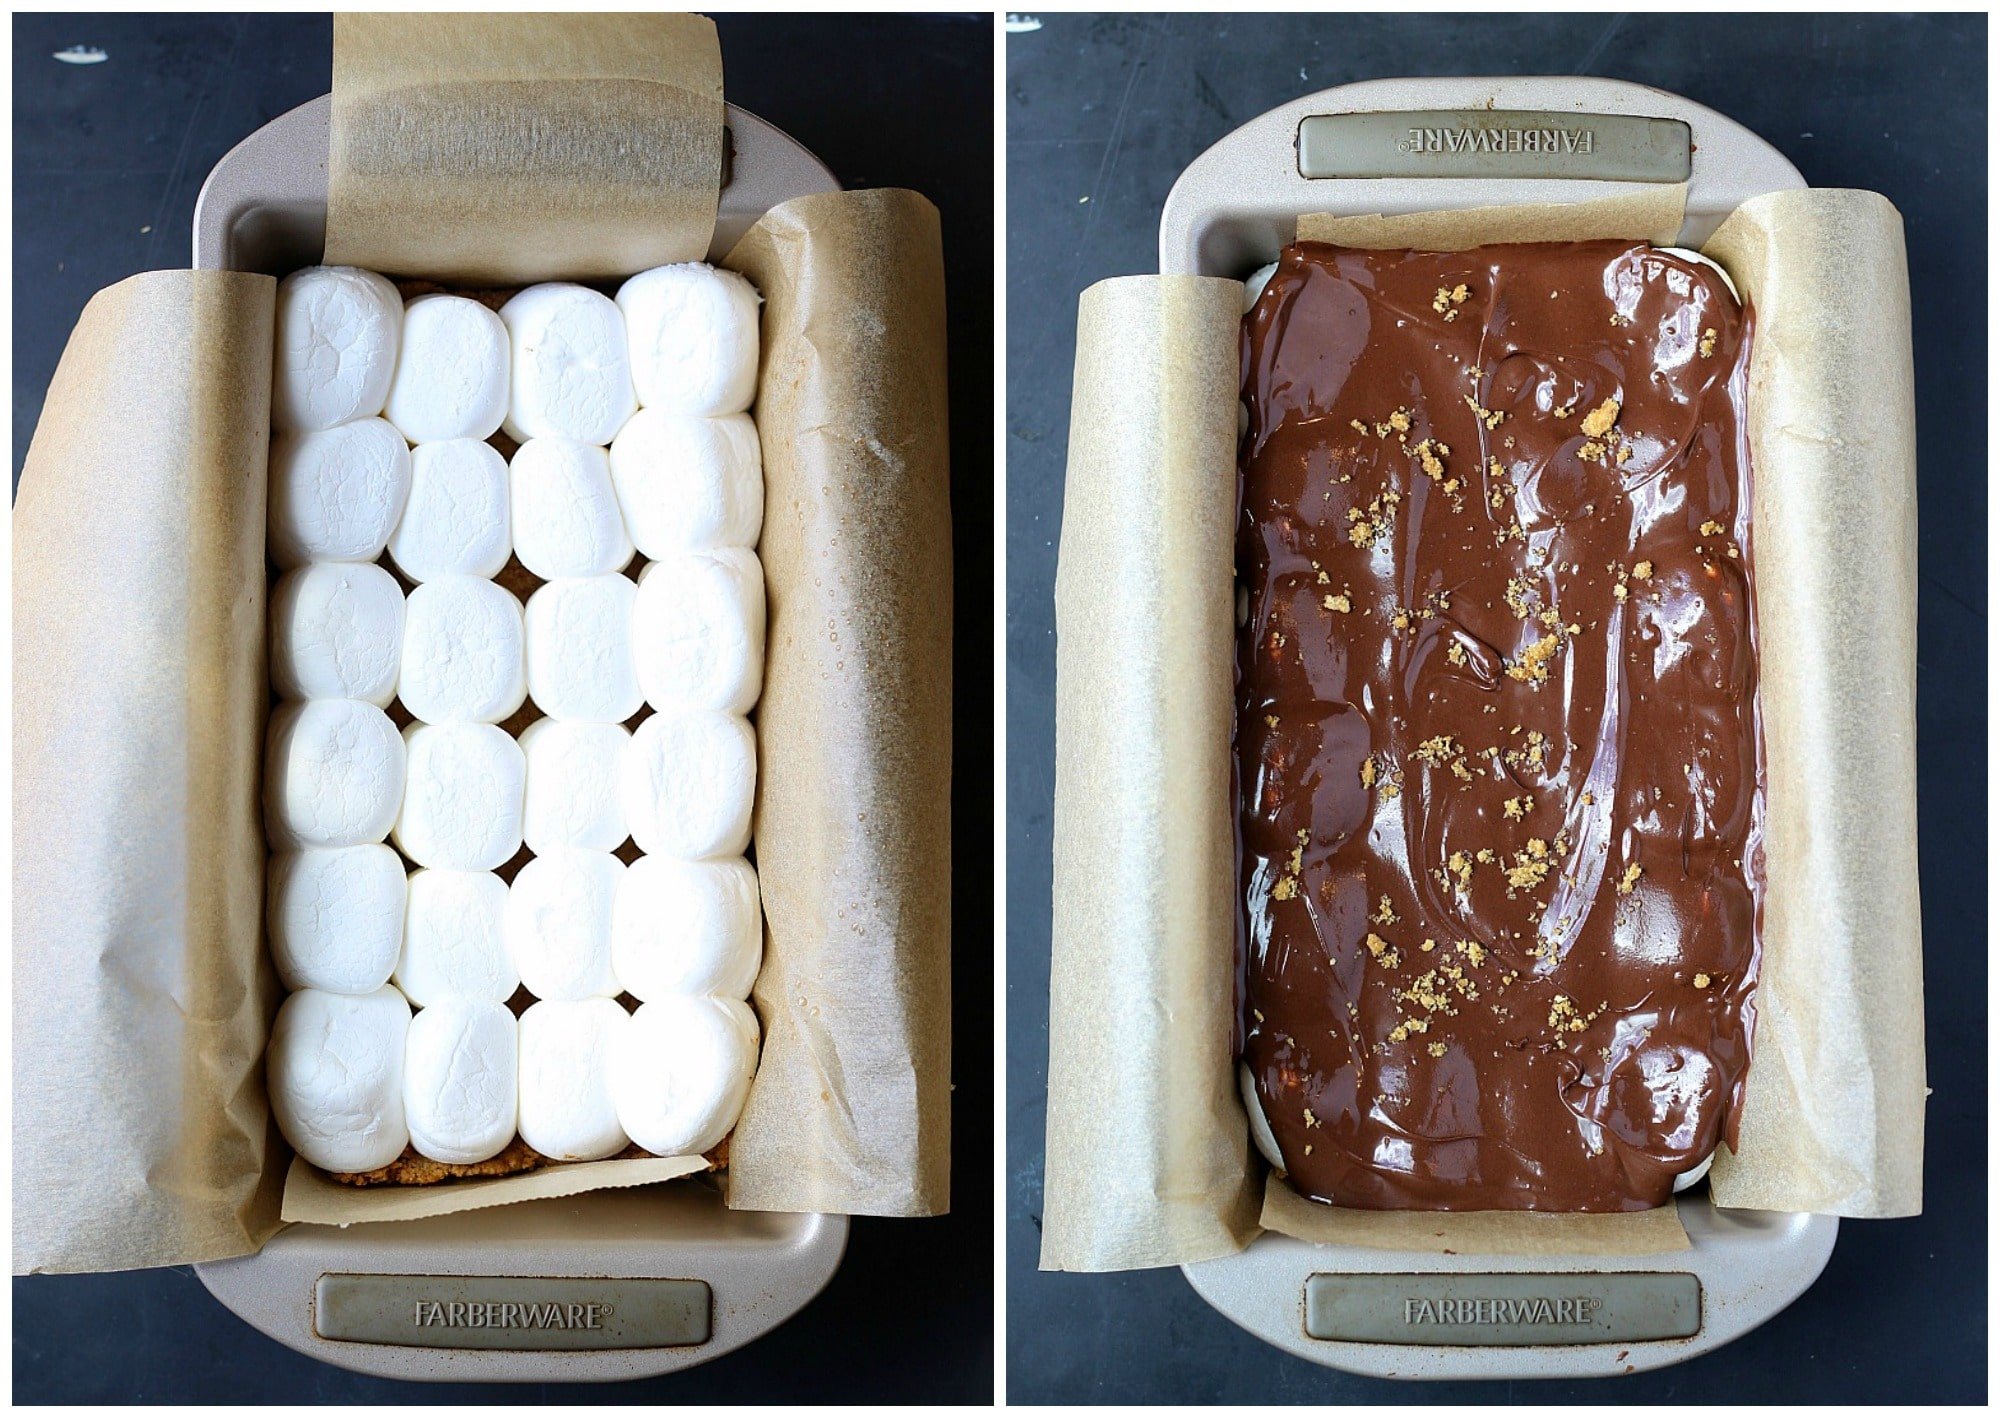 Two baking pans, one showing a layer of marshmallows and a second pan with a top layer of chocolate. 